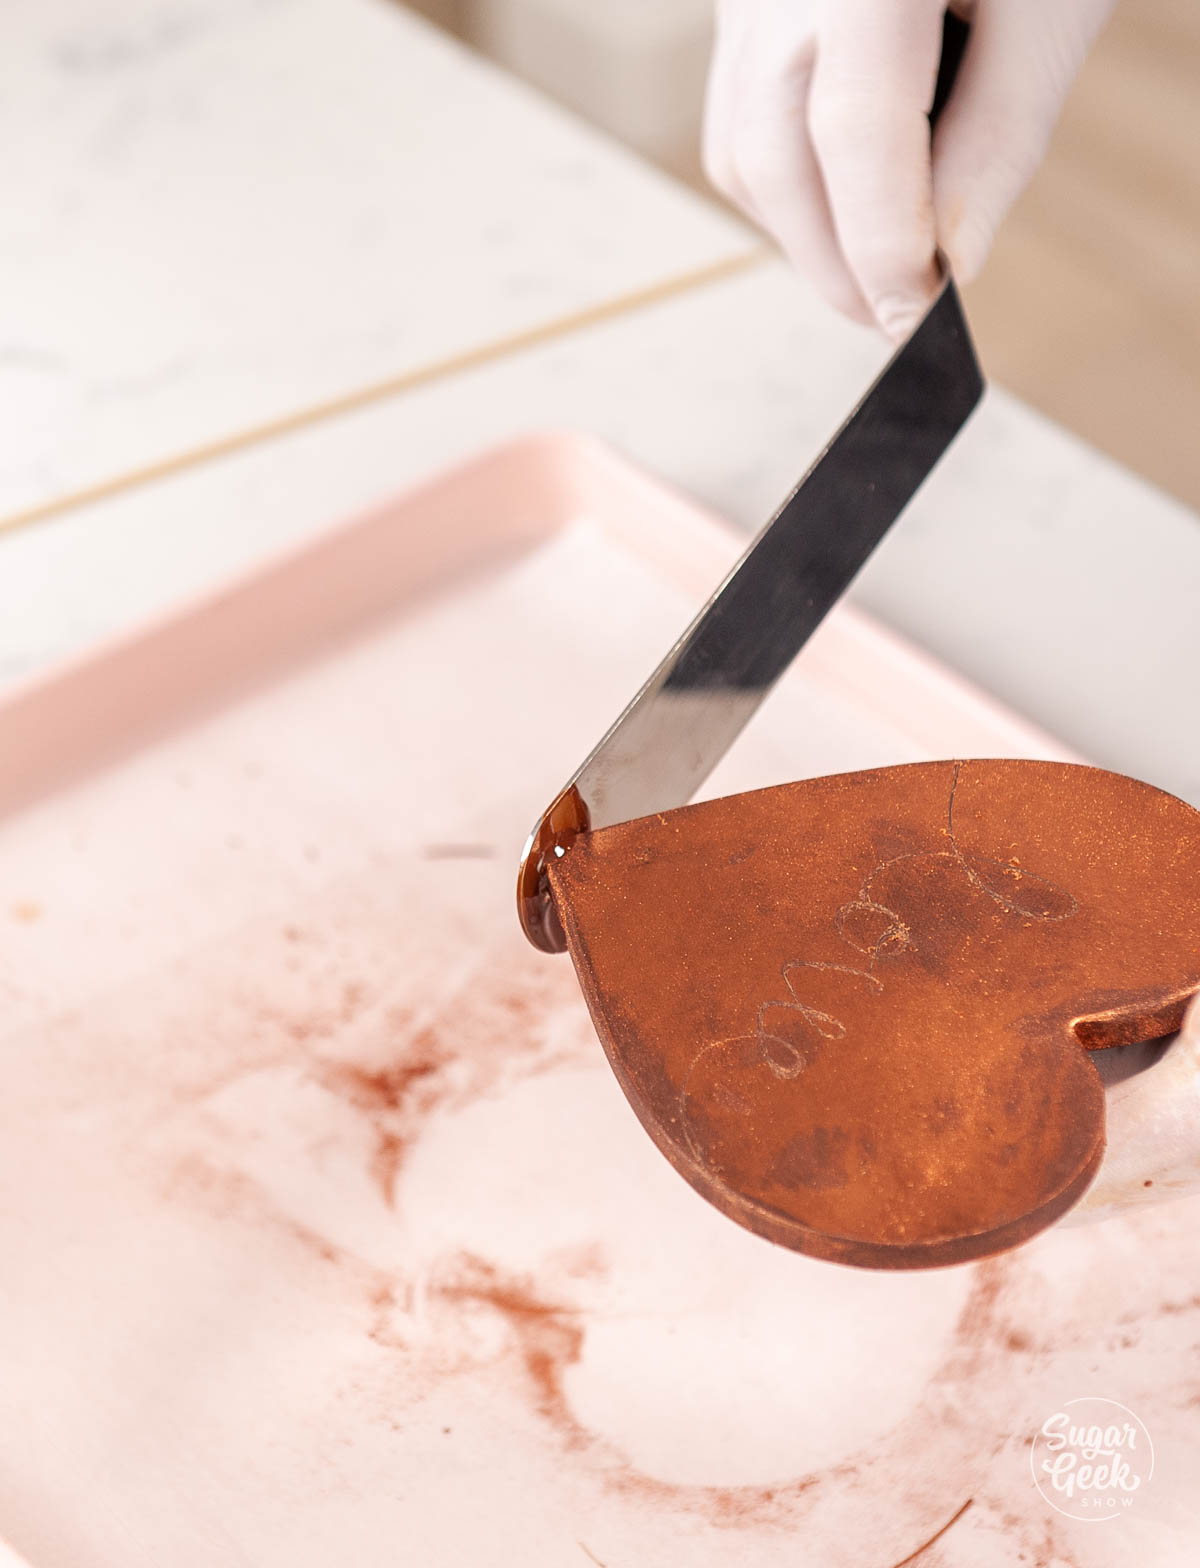 melting the tip of the chocolate heart with hot spatula